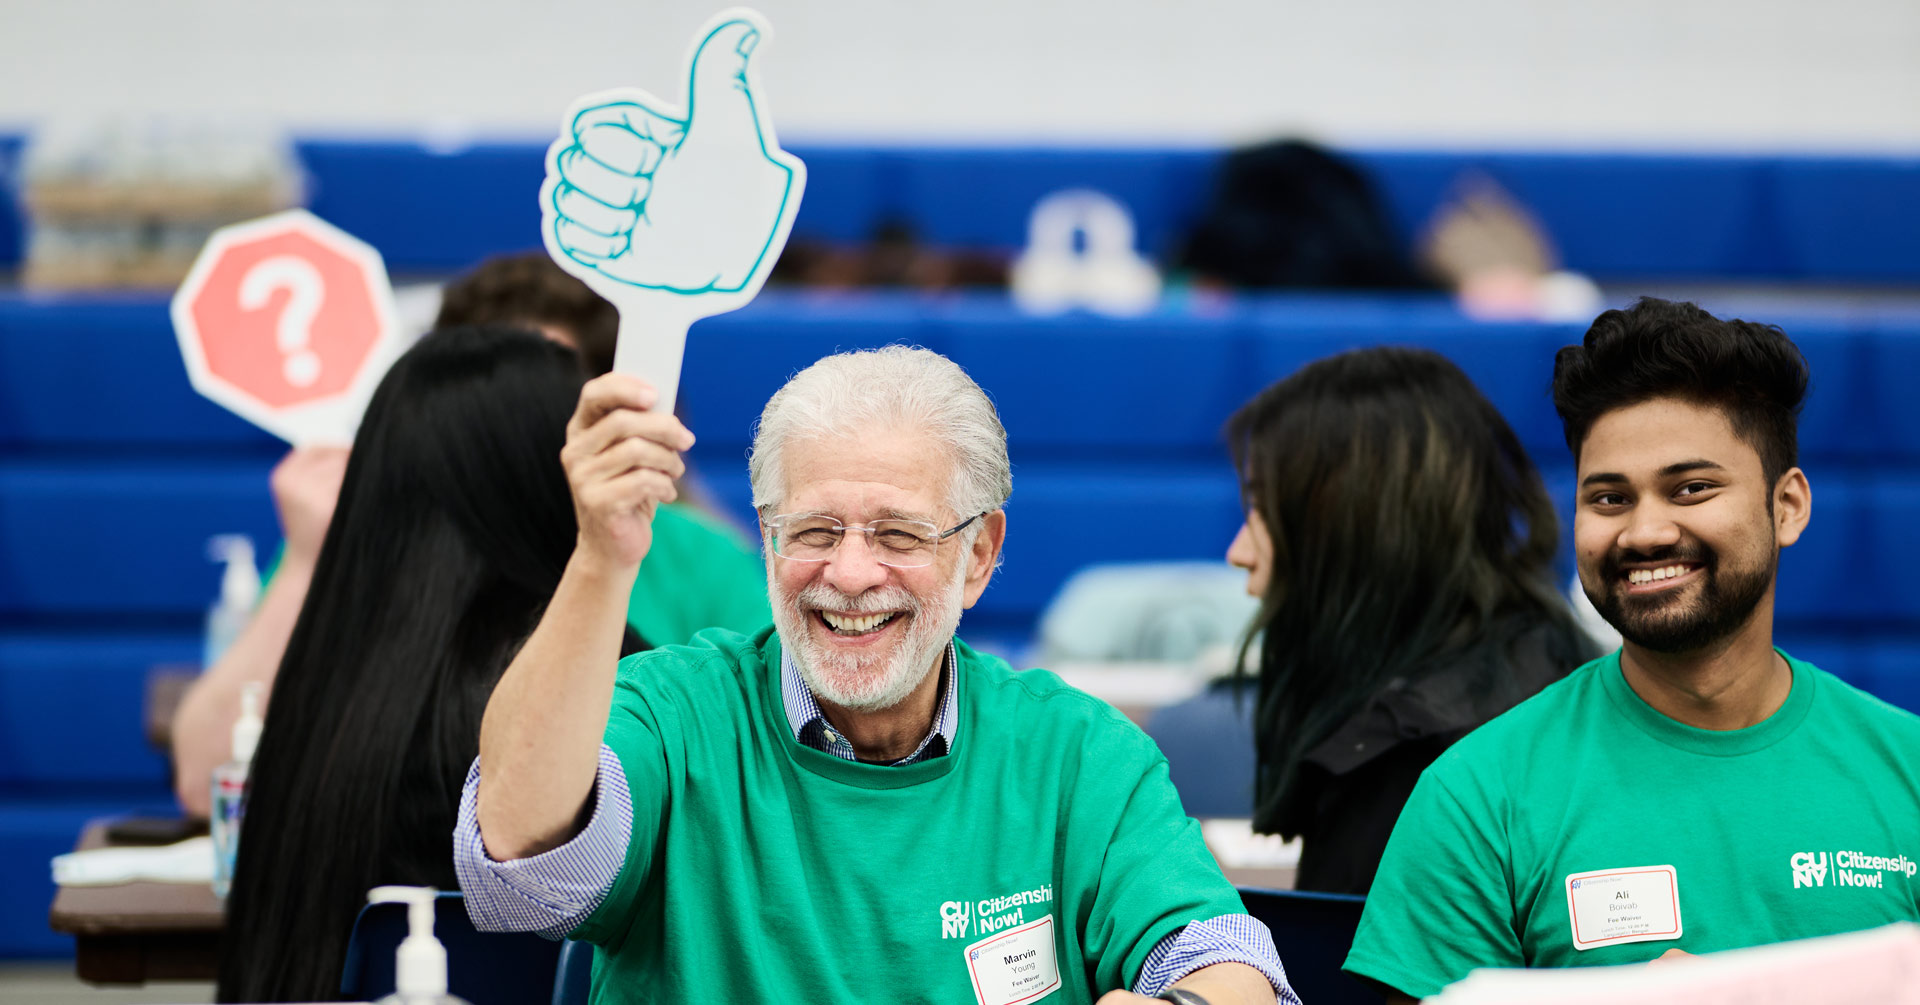 CUNY Citizenship Now! volunteer holds up a thumbs up sign to indicate that they are ready for the next attendee.